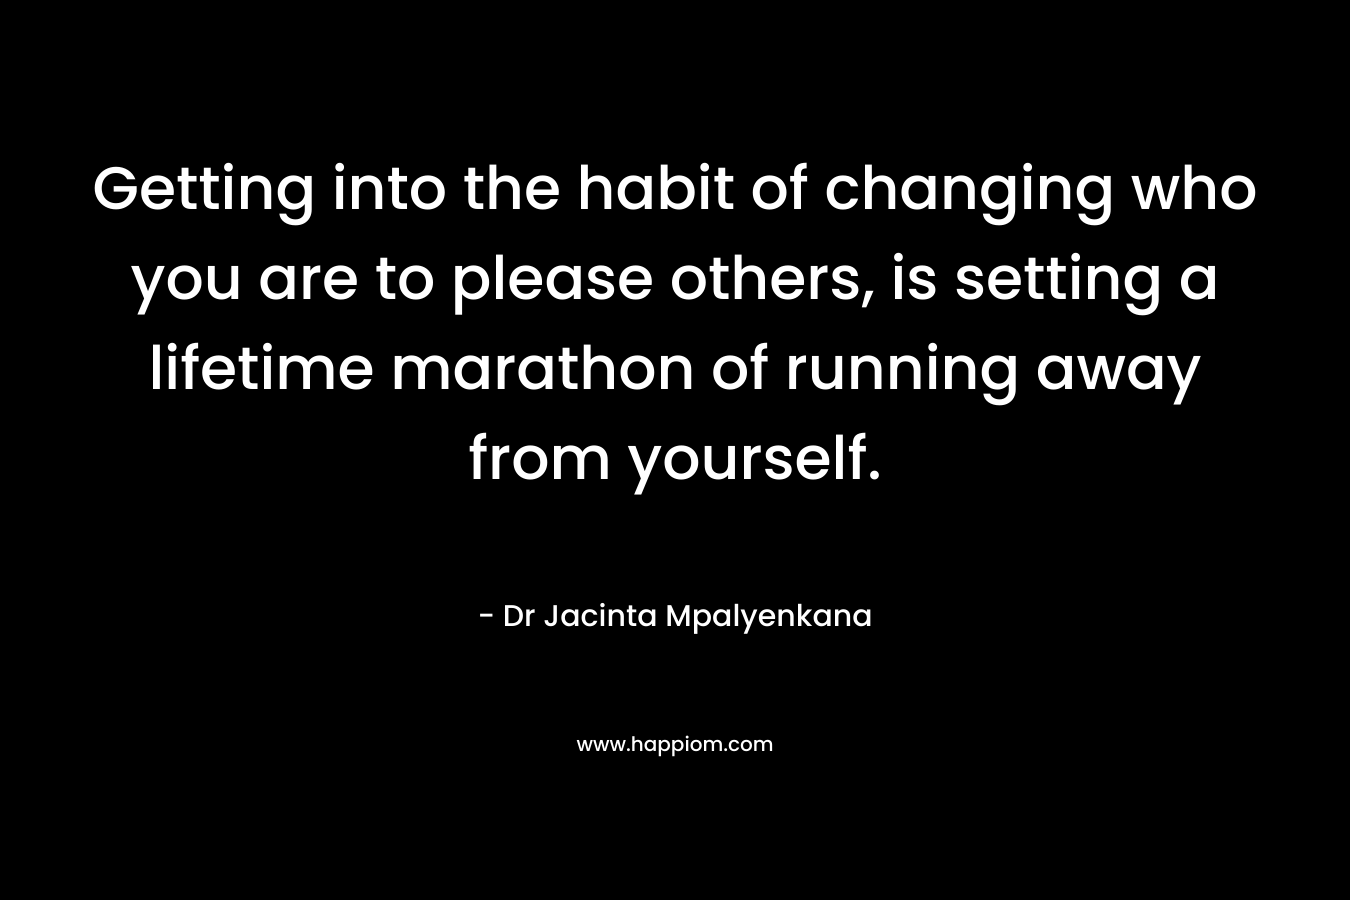 Getting into the habit of changing who you are to please others, is setting a lifetime marathon of running away from yourself.